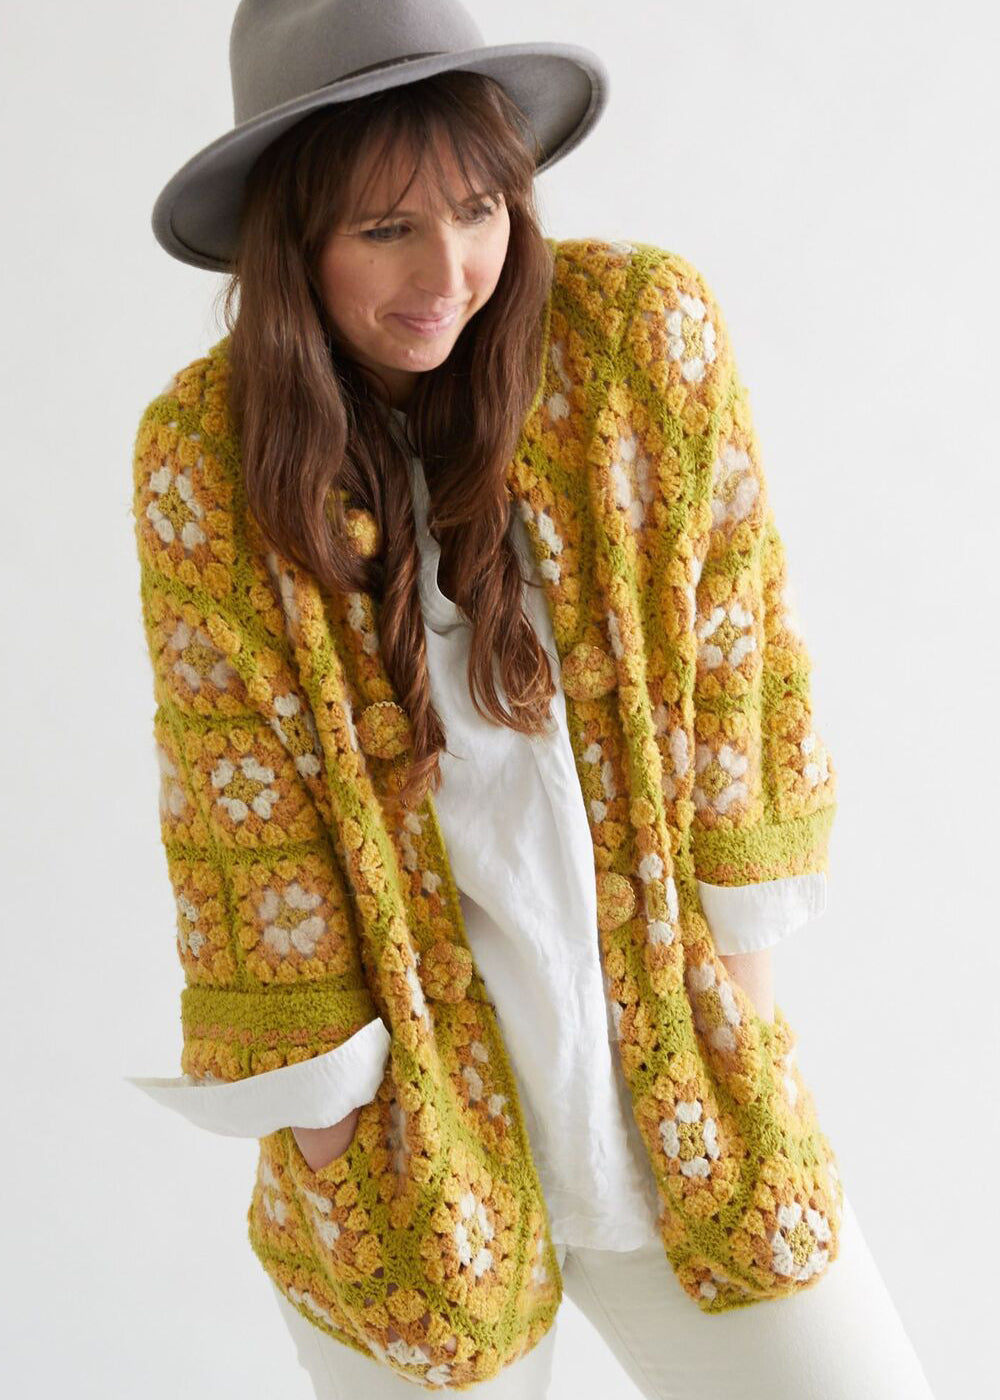 Crochet a Cute Varsity-Style Granny Square Cardigan, This Is